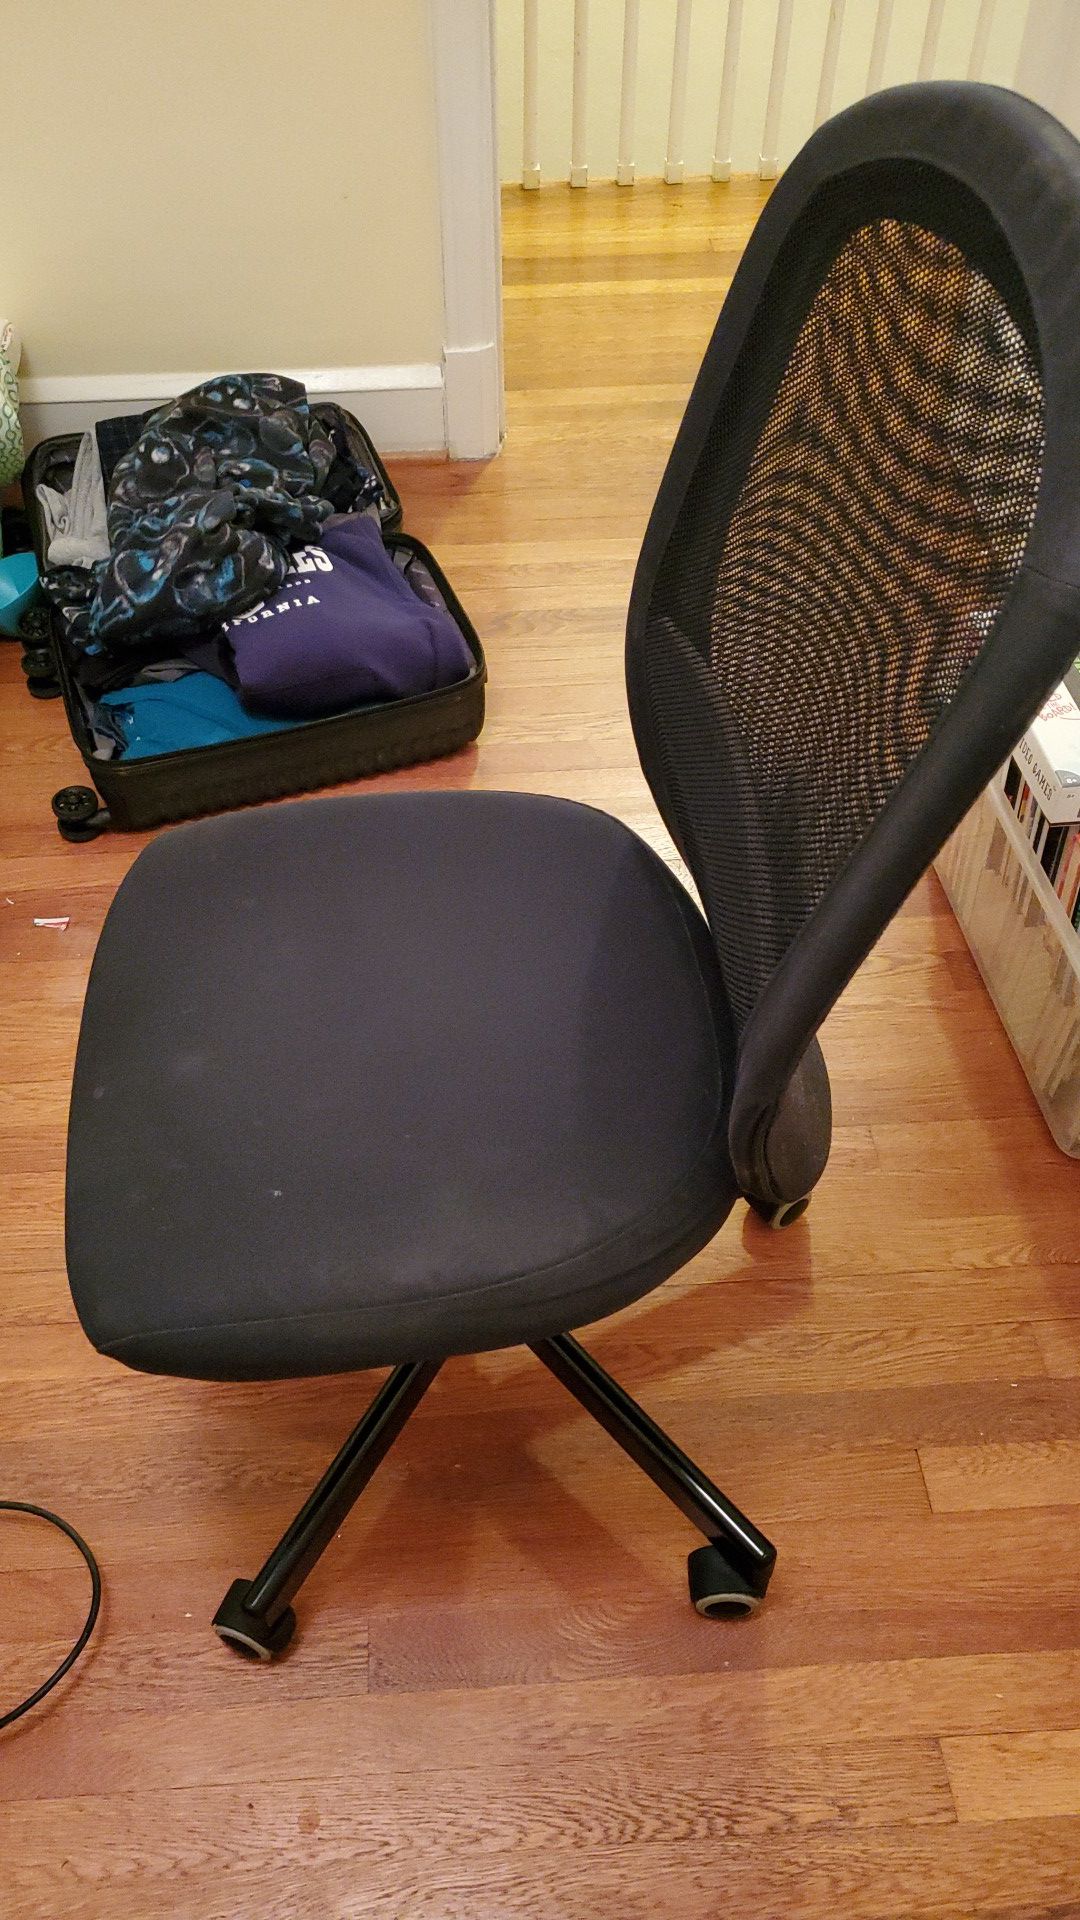 Ikea office chair. Great condition. $30.